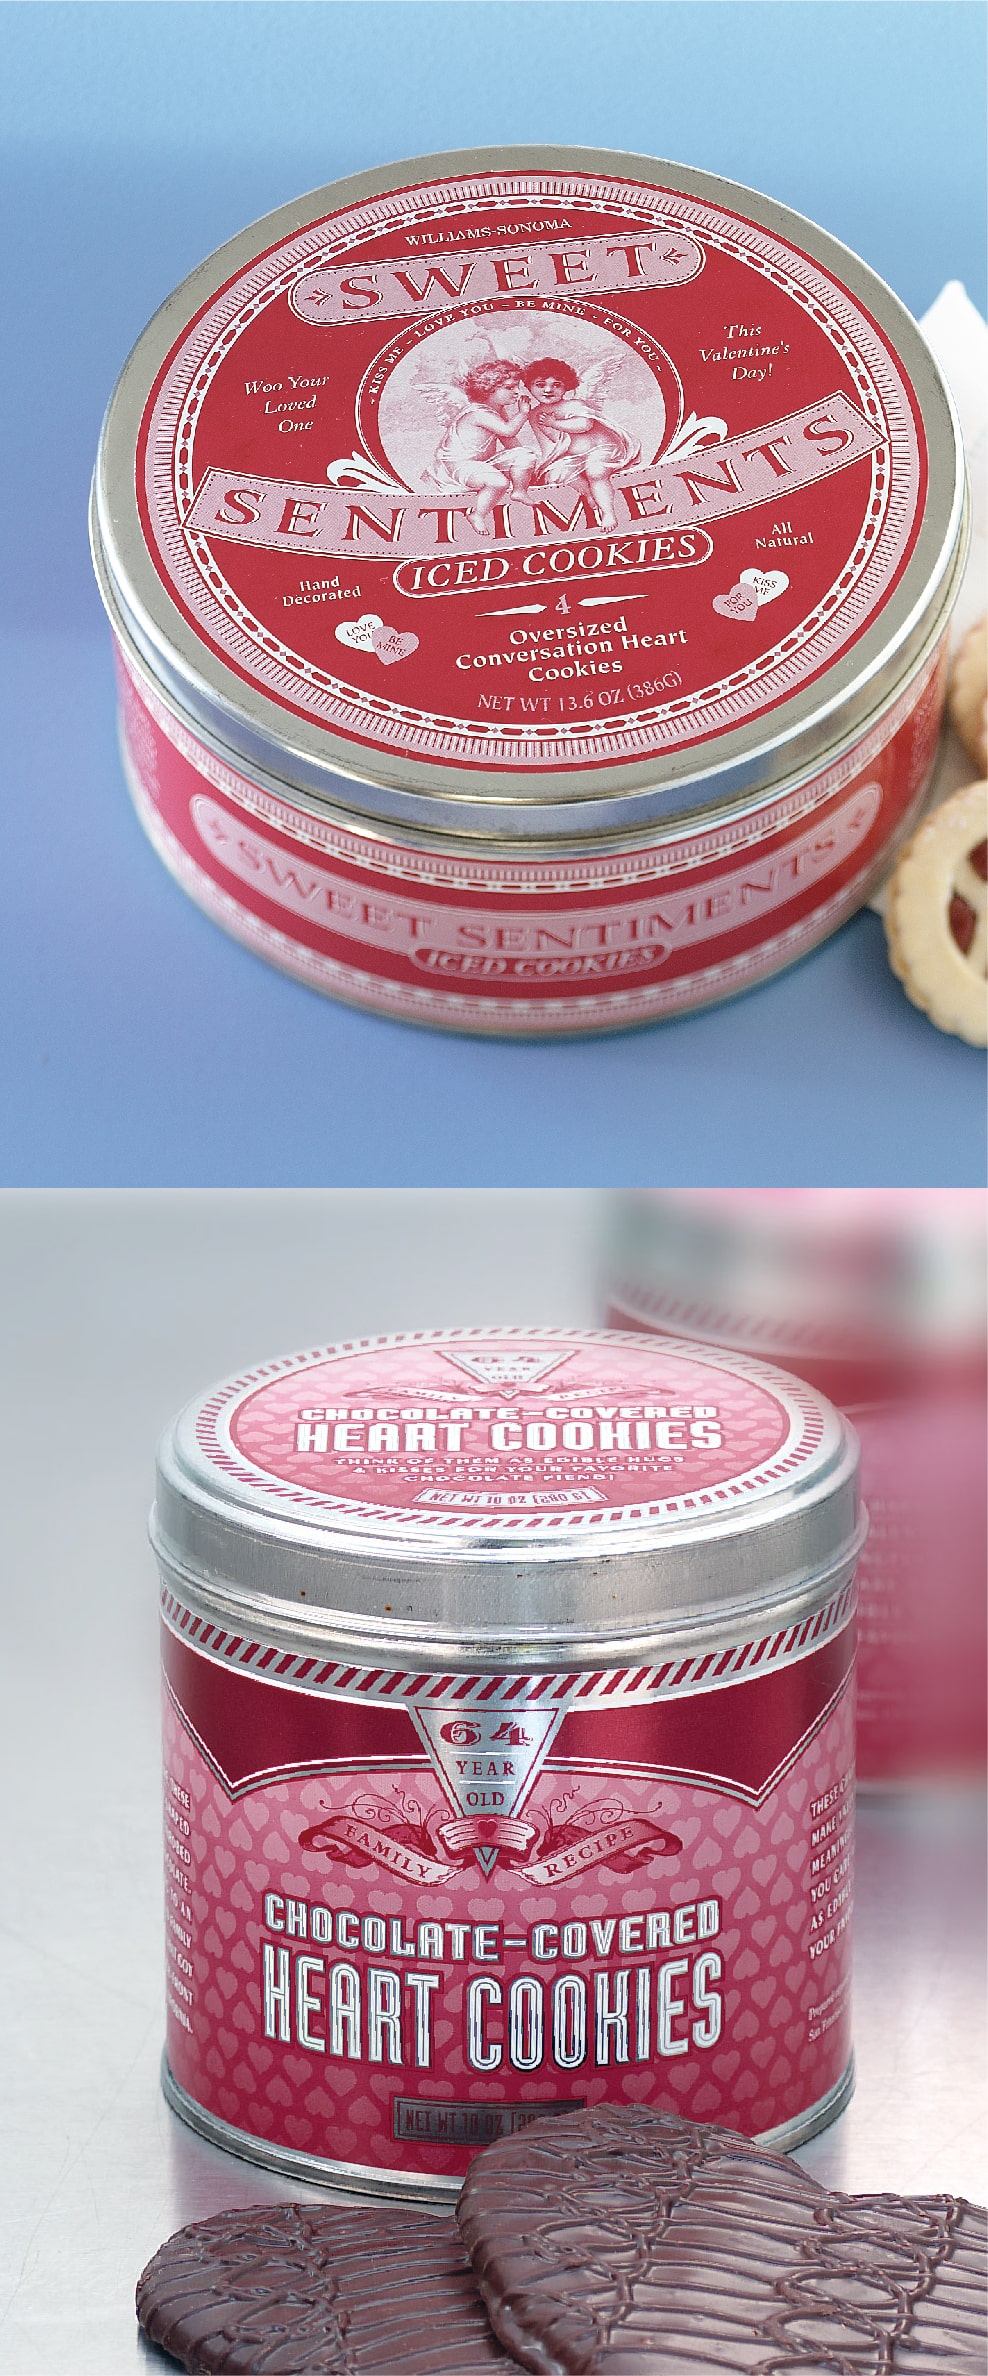 Williams Sonoma Valentines Cookie packaging. Design and photo creative direction by Juli Shore Design 